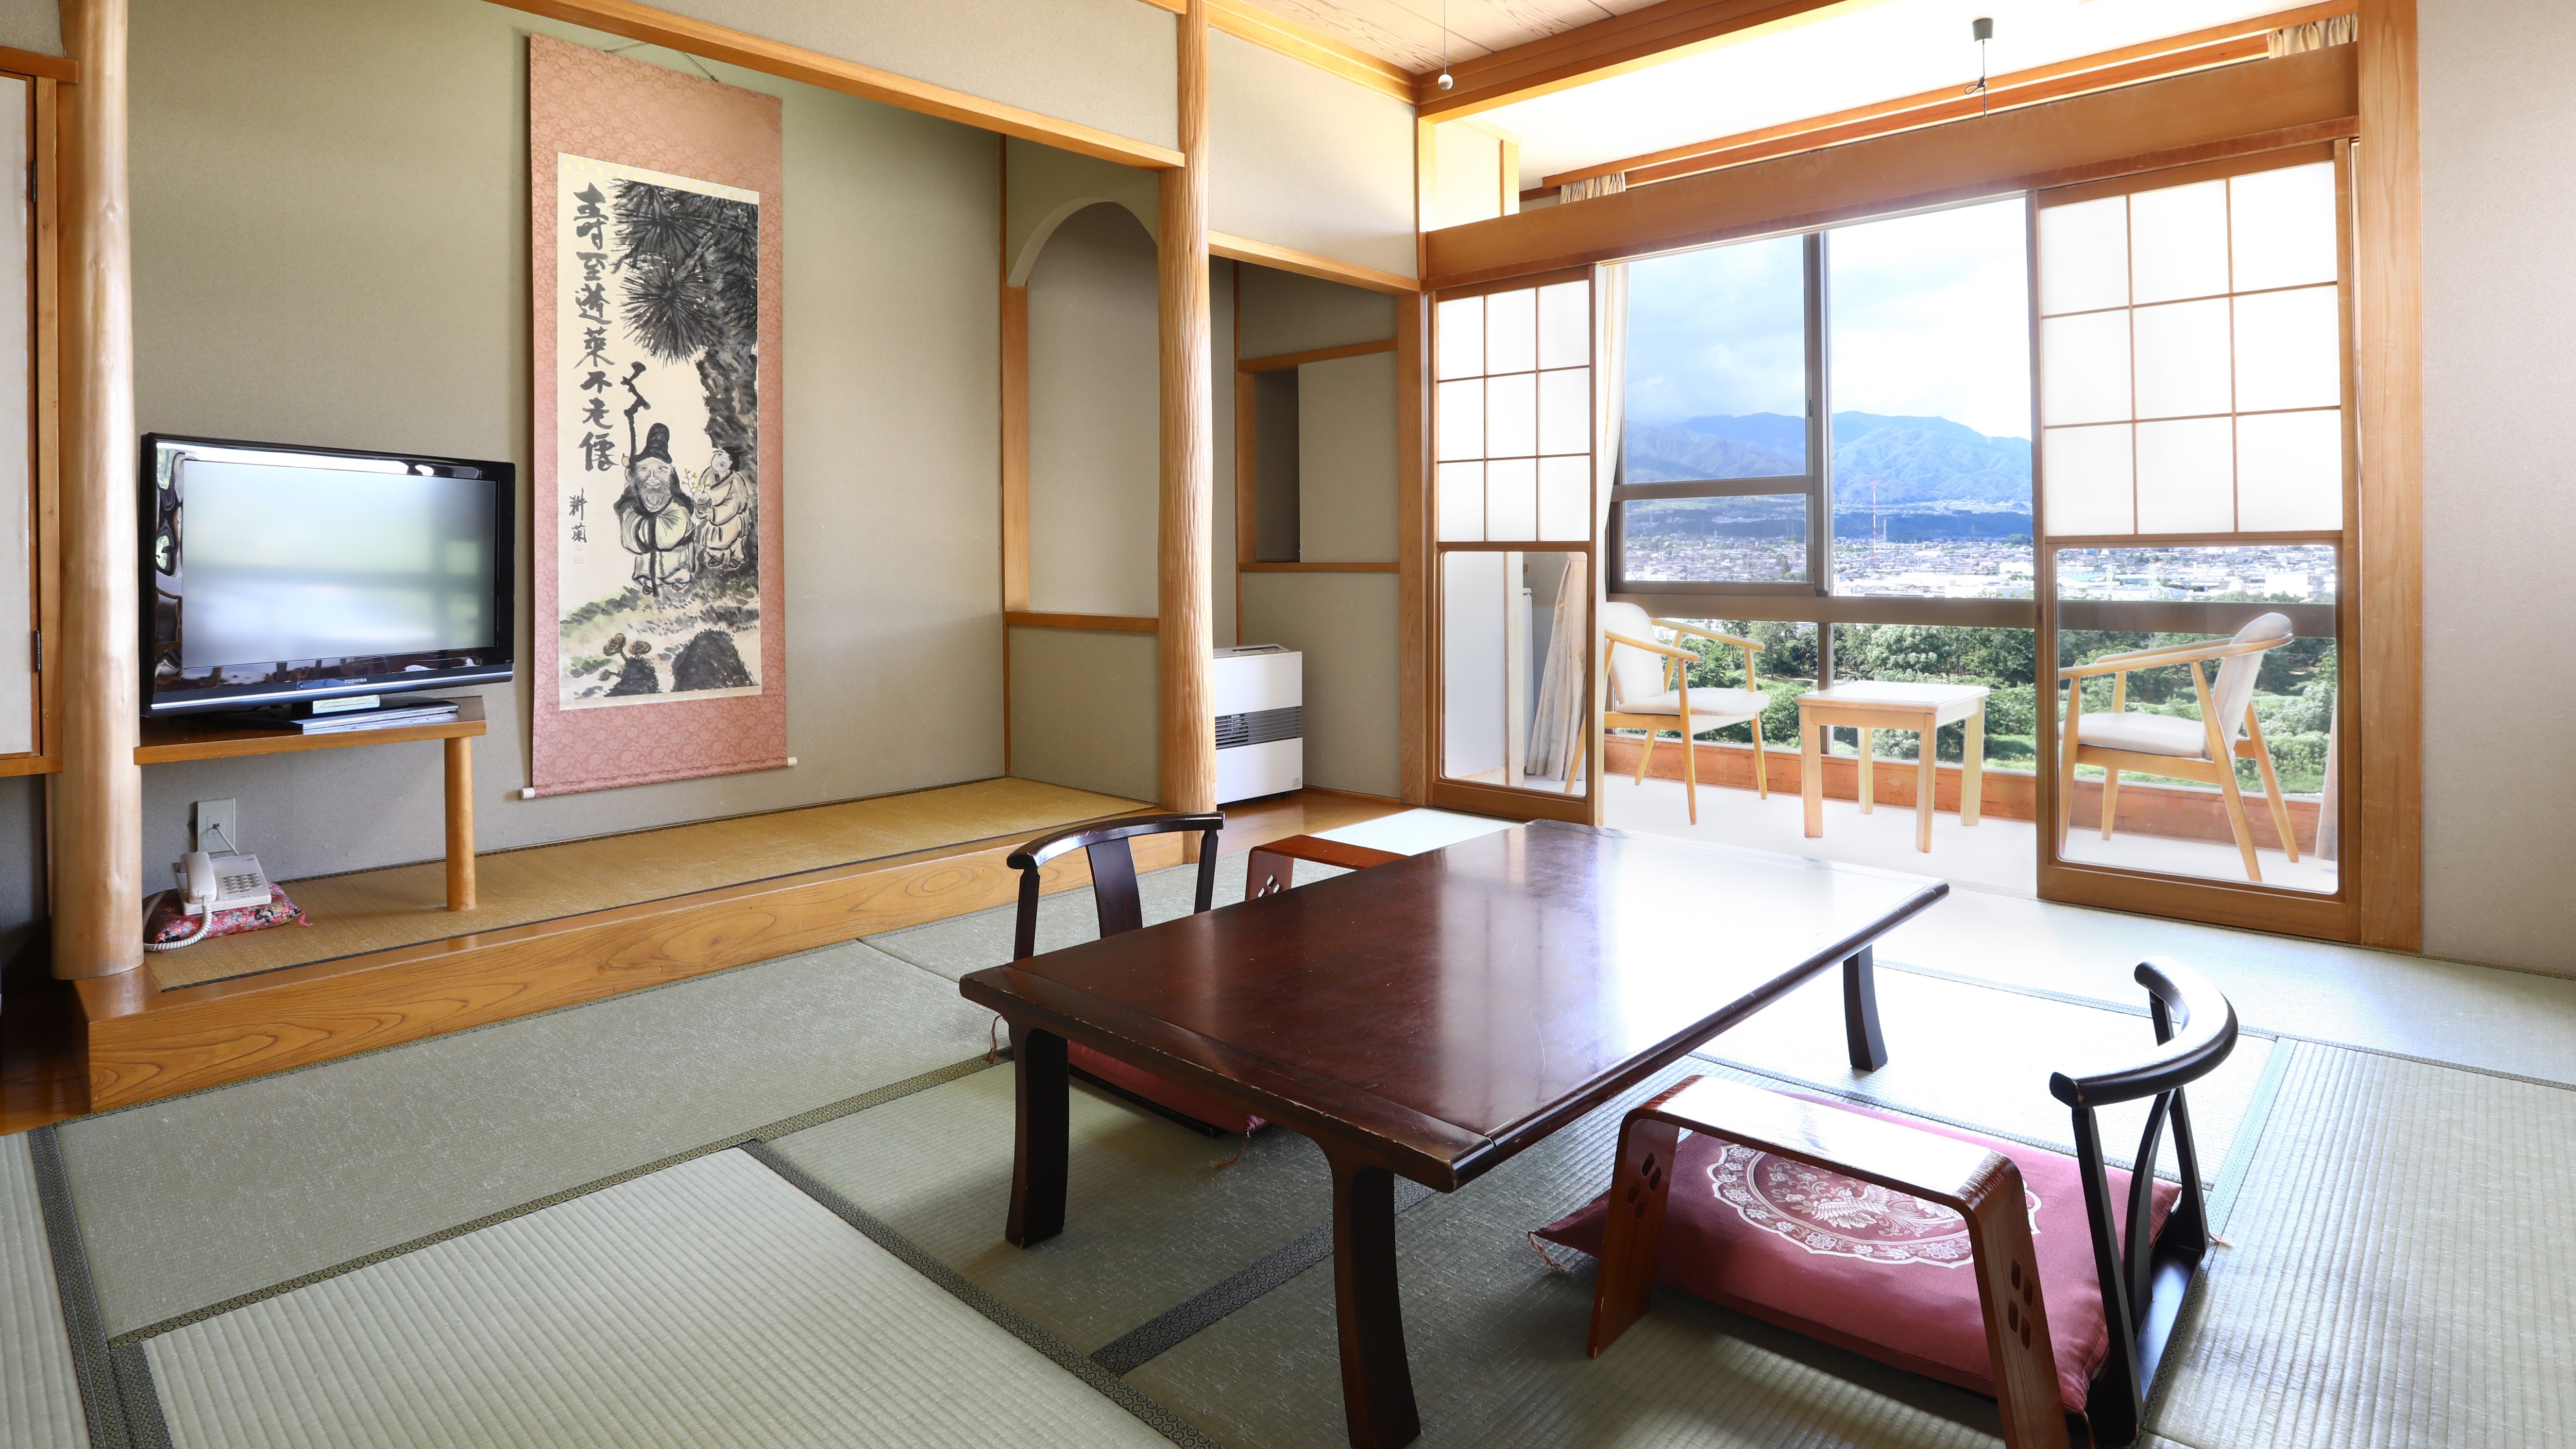 □ [Standard Japanese-style room] A room with a taste unique to a Japanese-style inn. For a relaxing hot spring trip